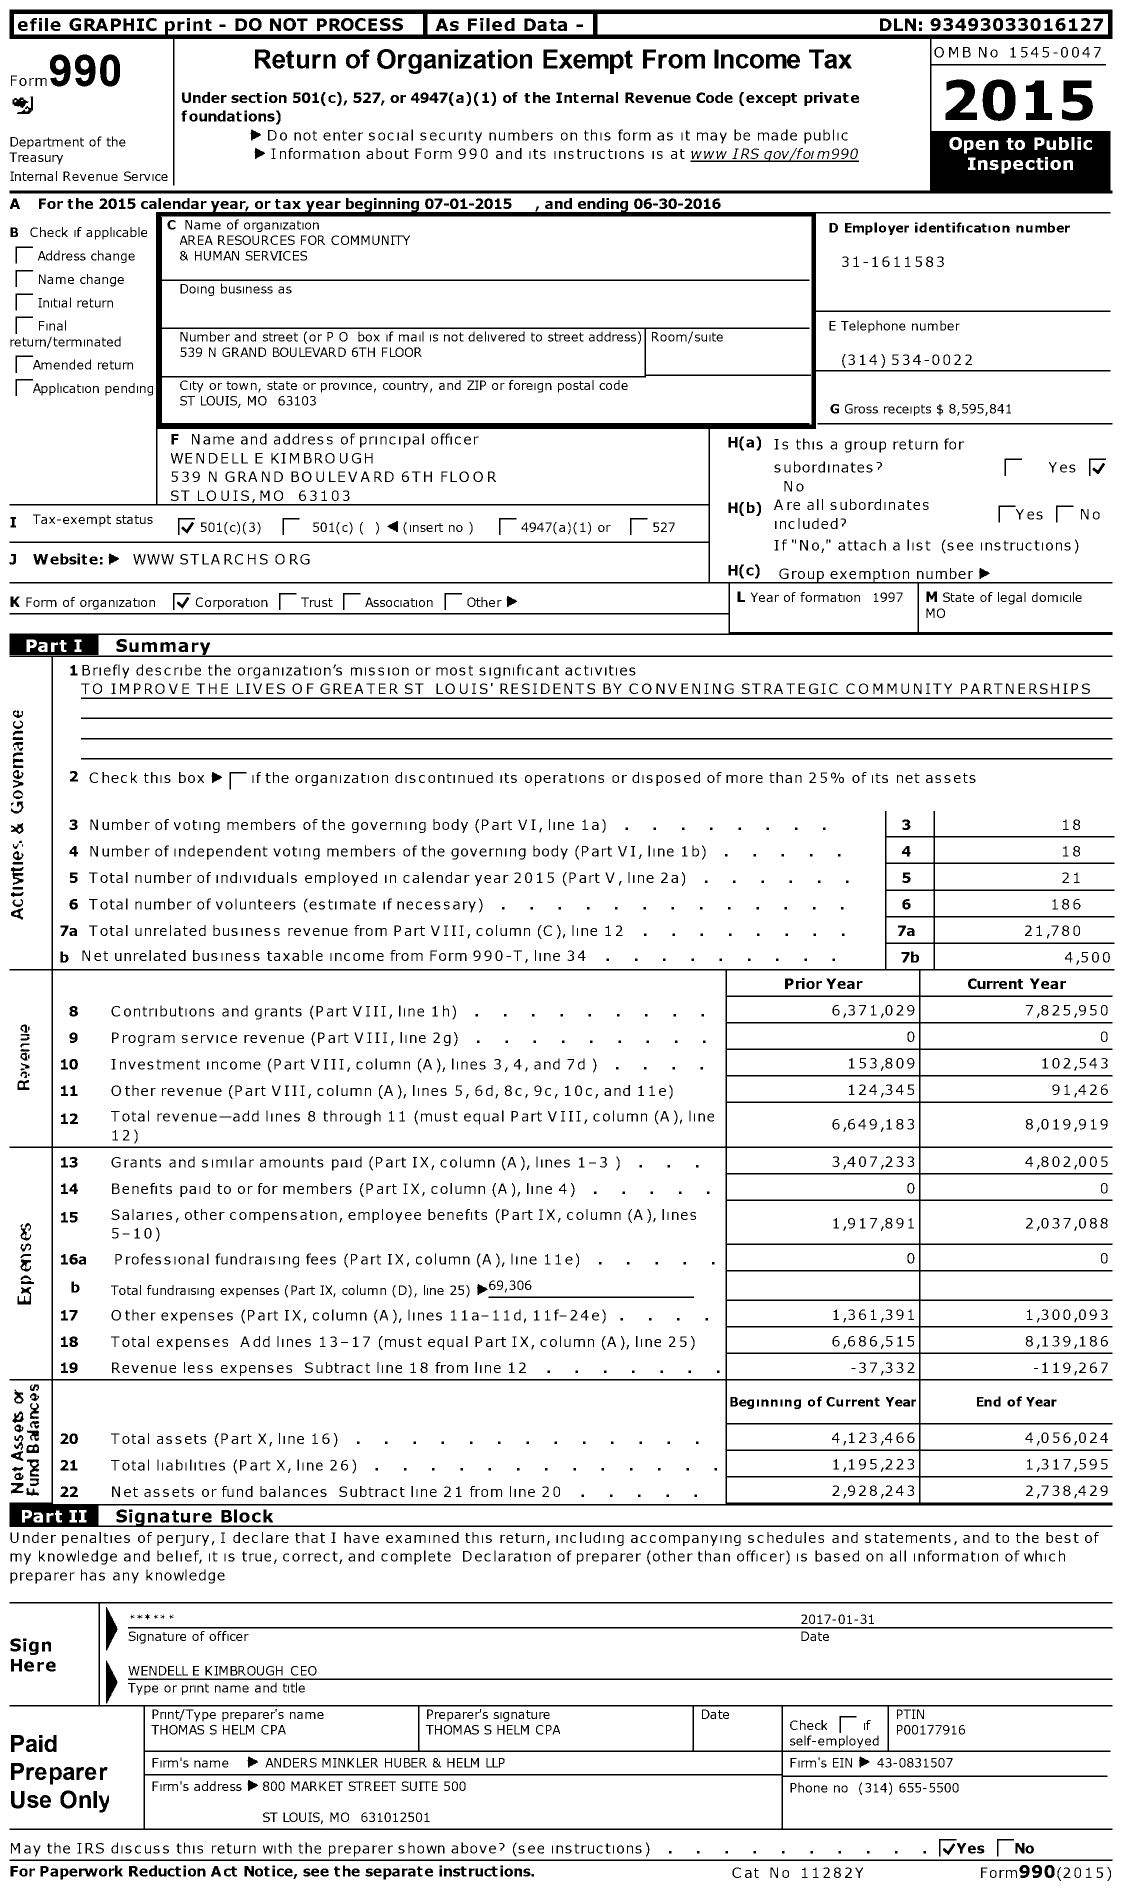 Image of first page of 2015 Form 990 for Area Resources for Community and Human Services (ARCHS)